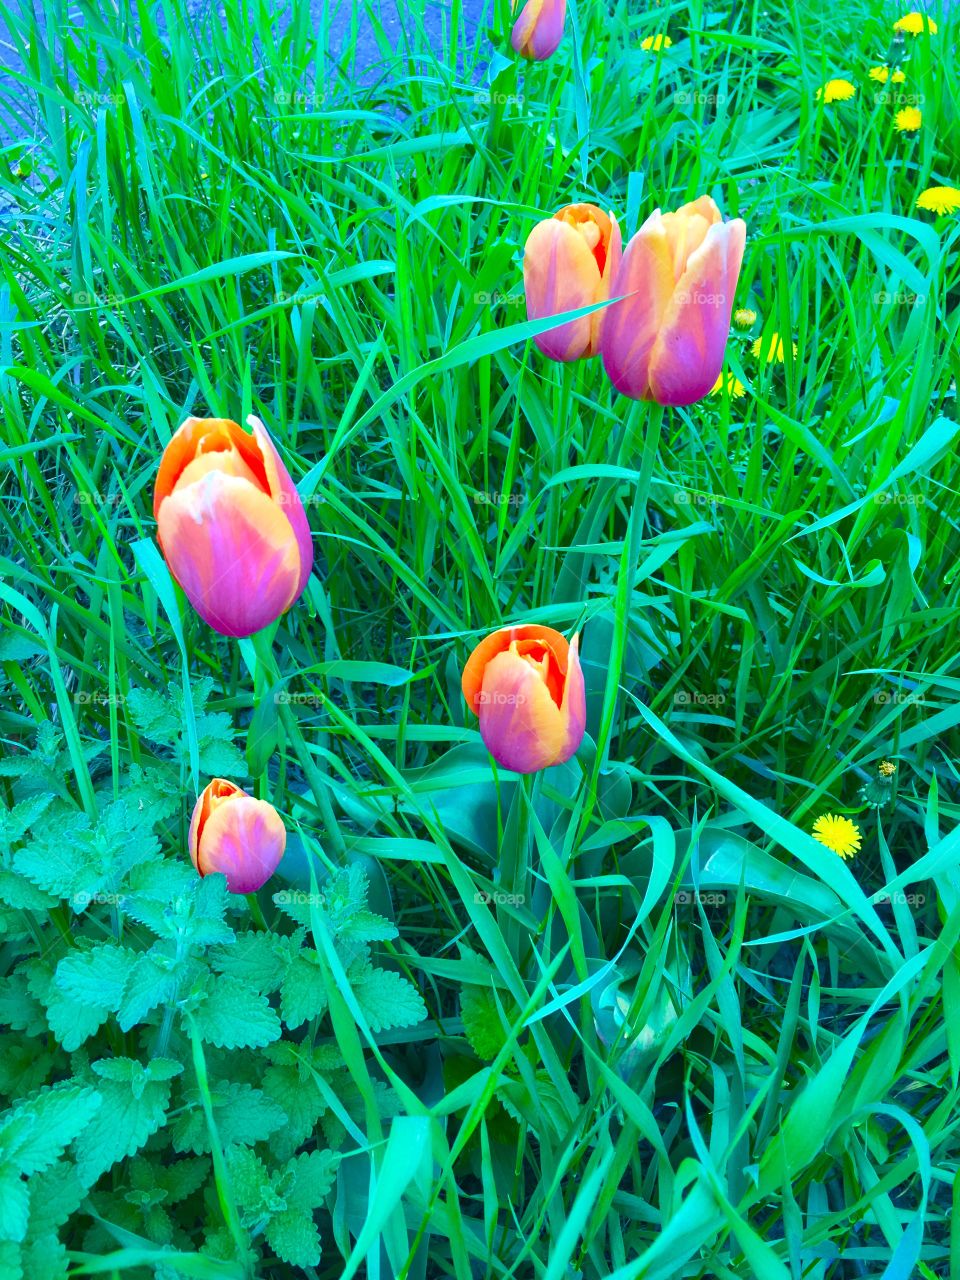 Beautiful pinky orange flowers with vibrant green grass